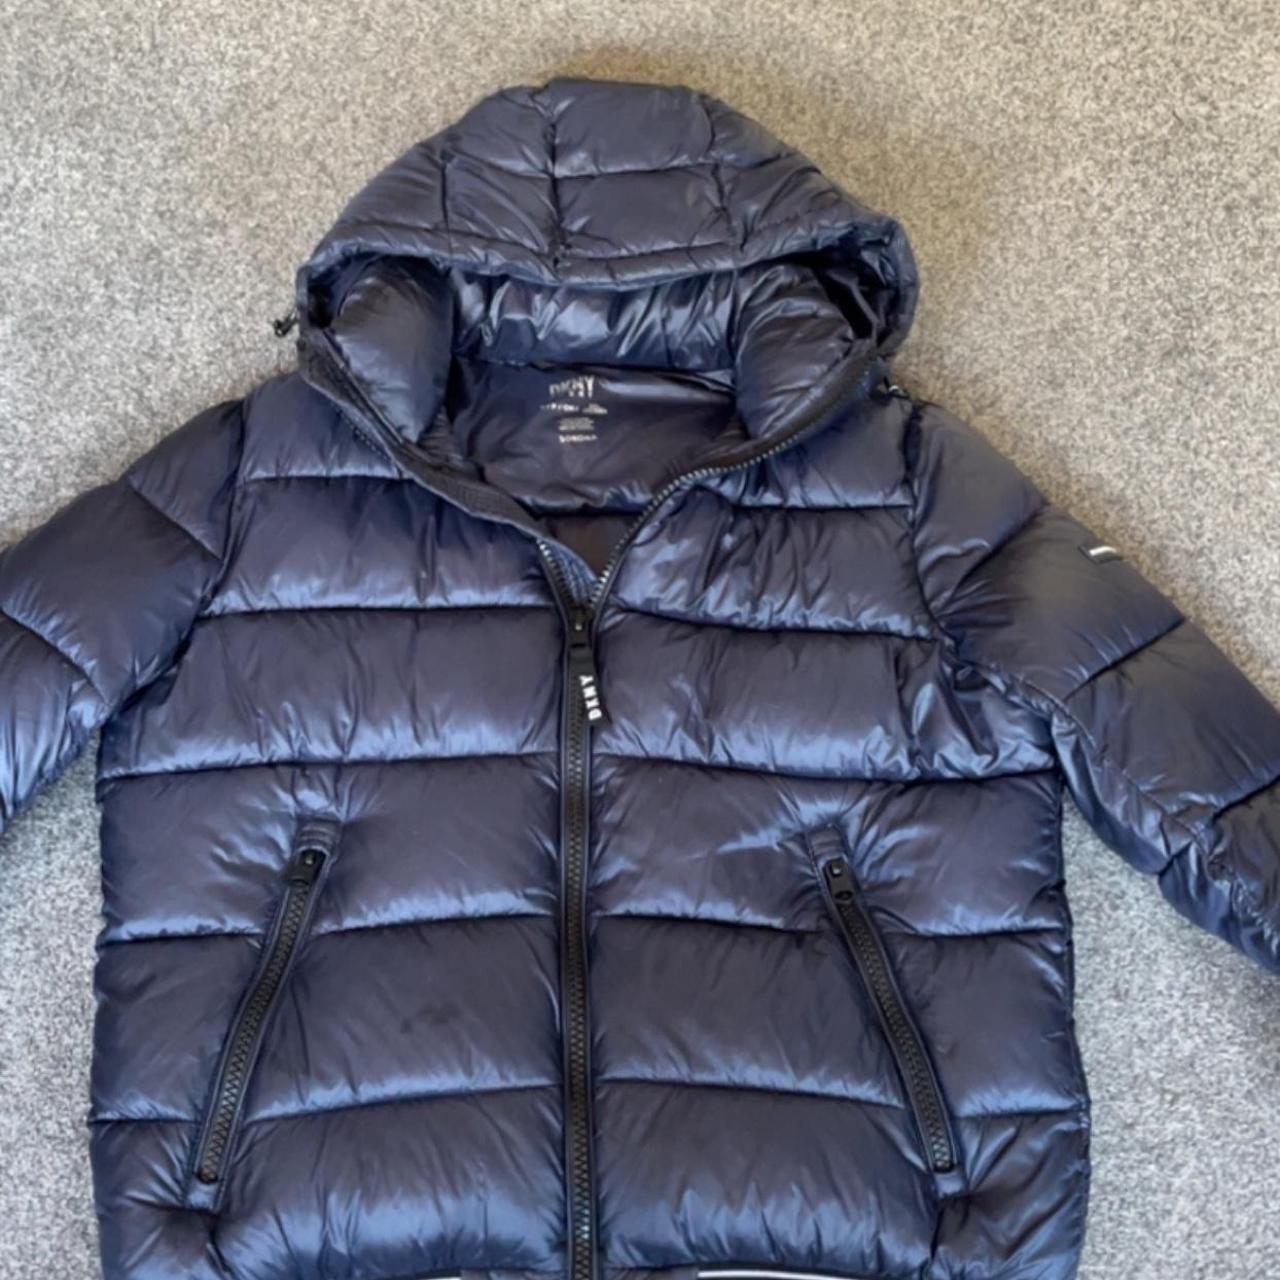 Dkny puffer jacket Amazing condition worn 1 or 2... - Depop